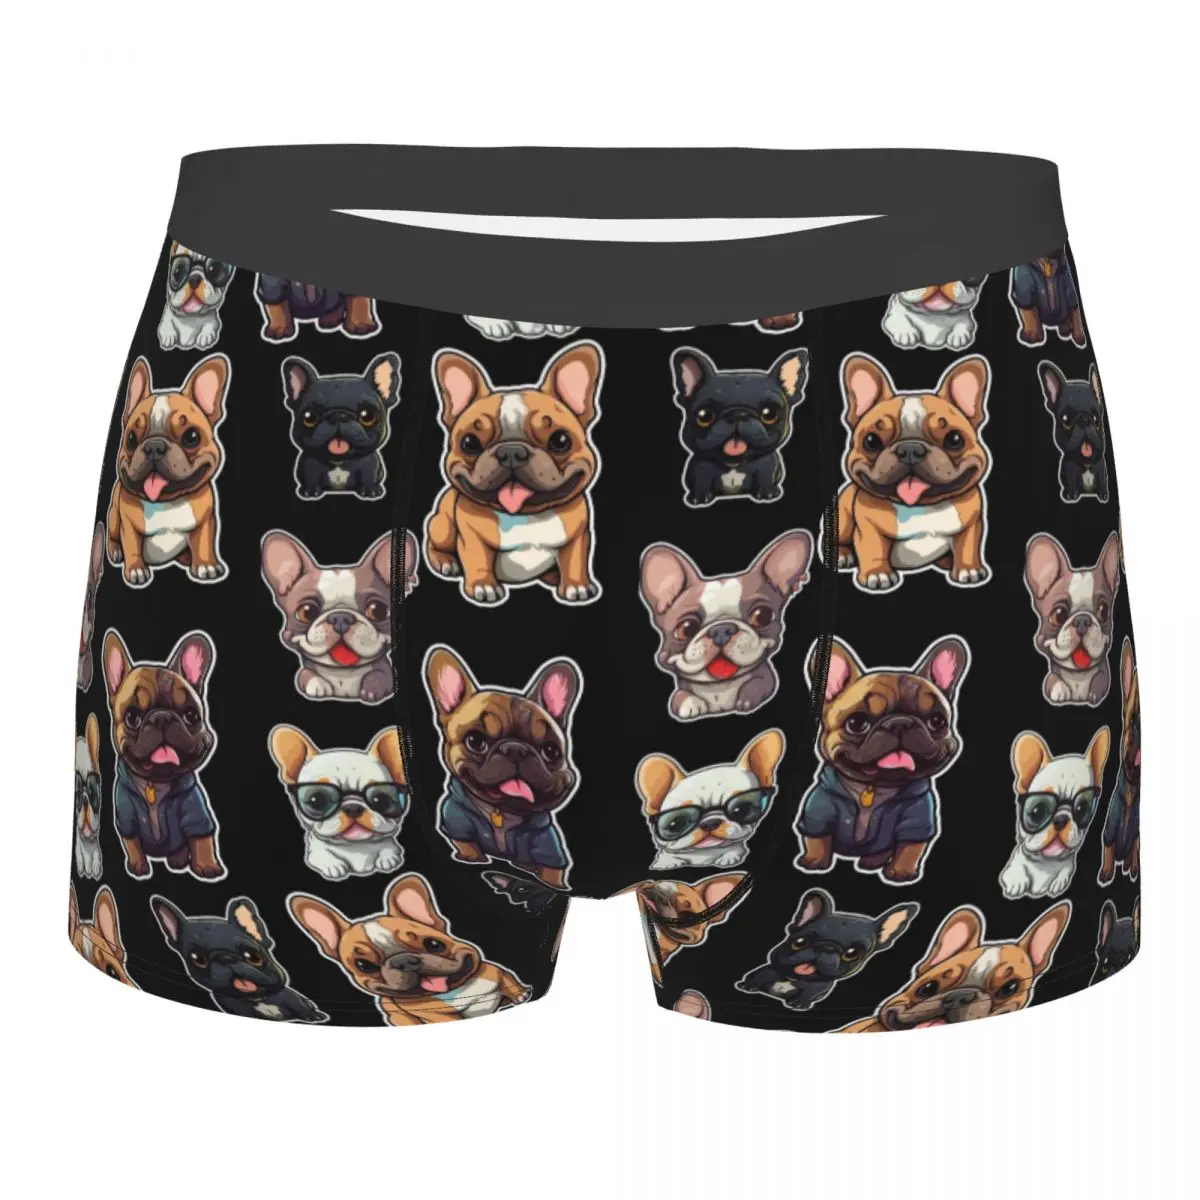 pattern Cute Pets Bulldog Mencosy Boxer Briefs Underwear Highly Breathable Top Quality Gift Idea cool animals lions tigers mencosy boxer briefs 3d printing underwear highly breathable top quality gift idea